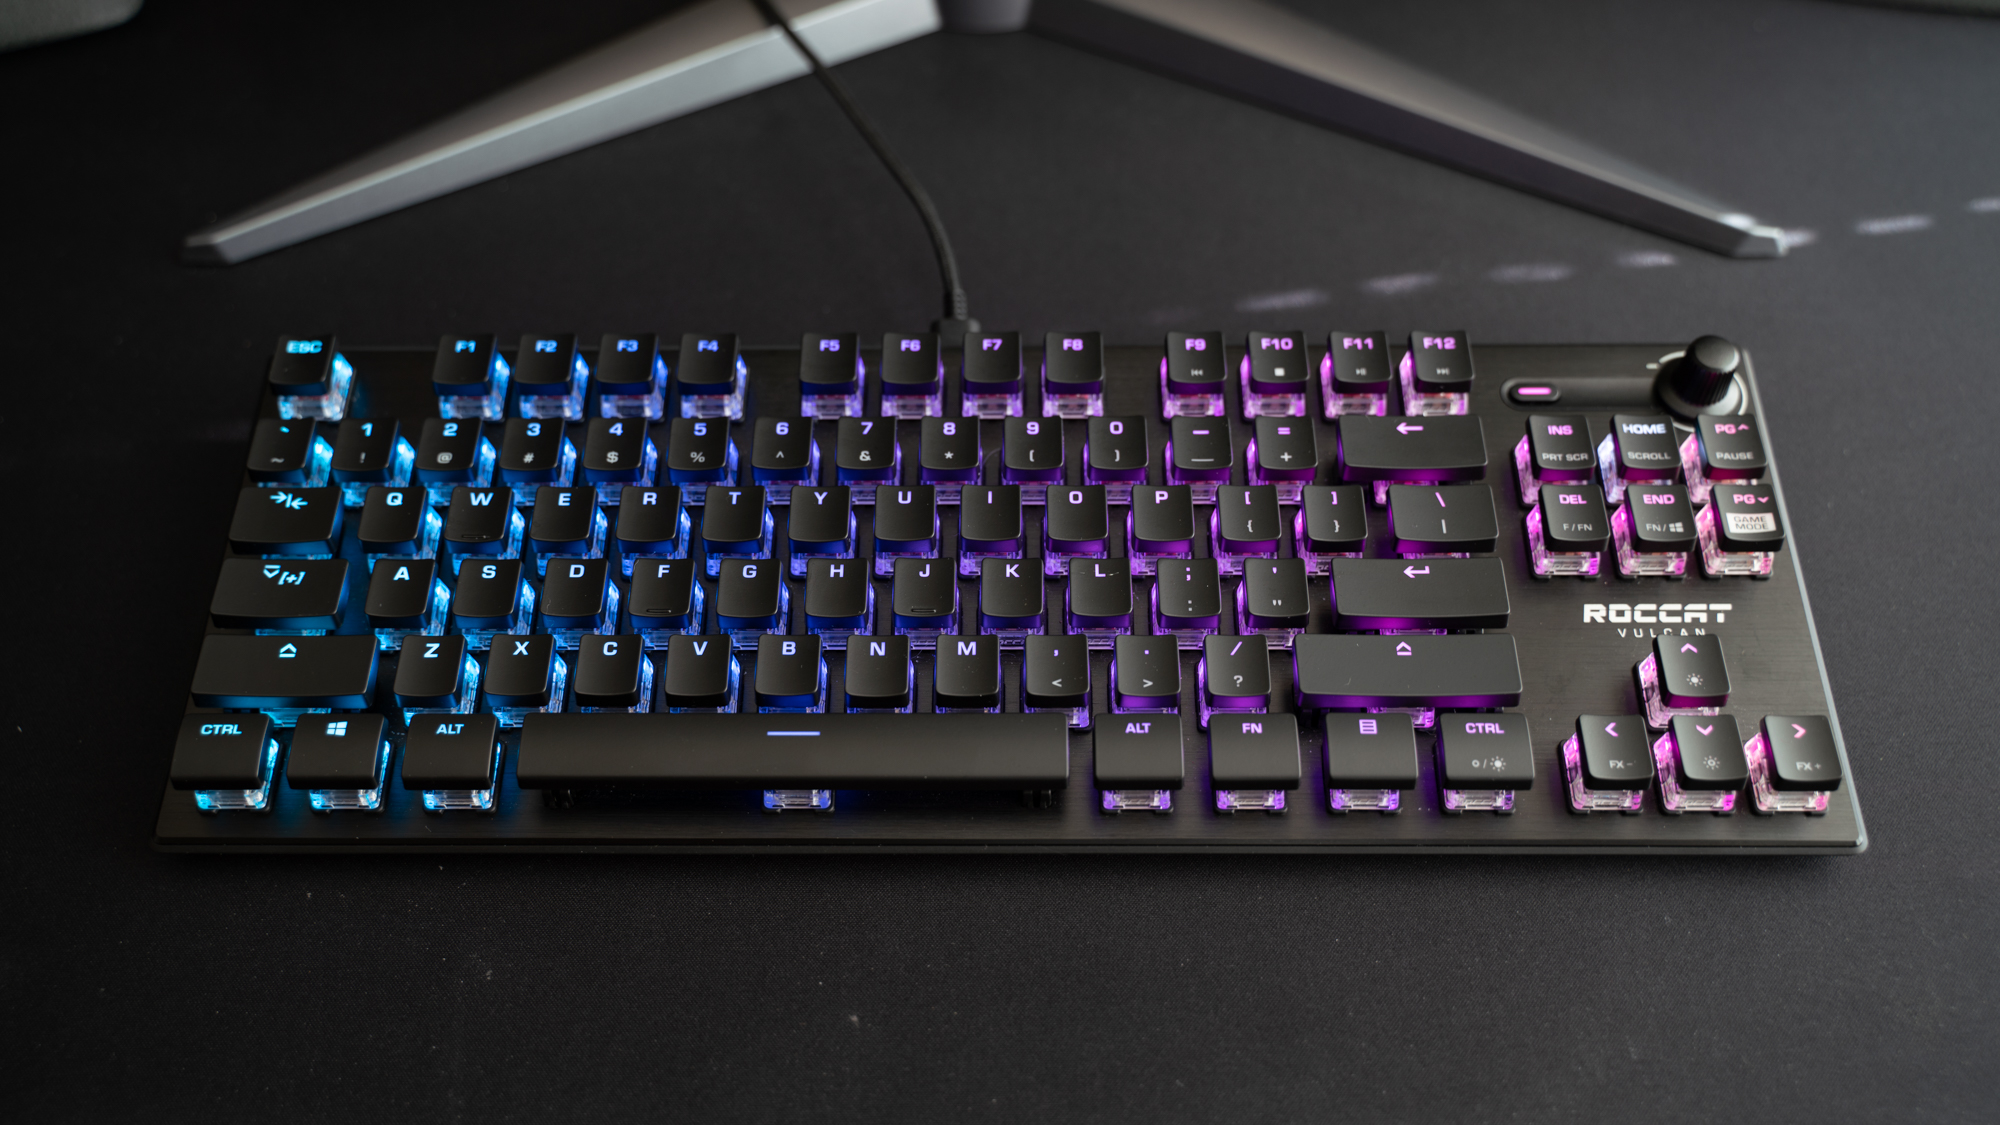 ROCCAT Vulcan TKL Pro Review (Page 2 of 3)